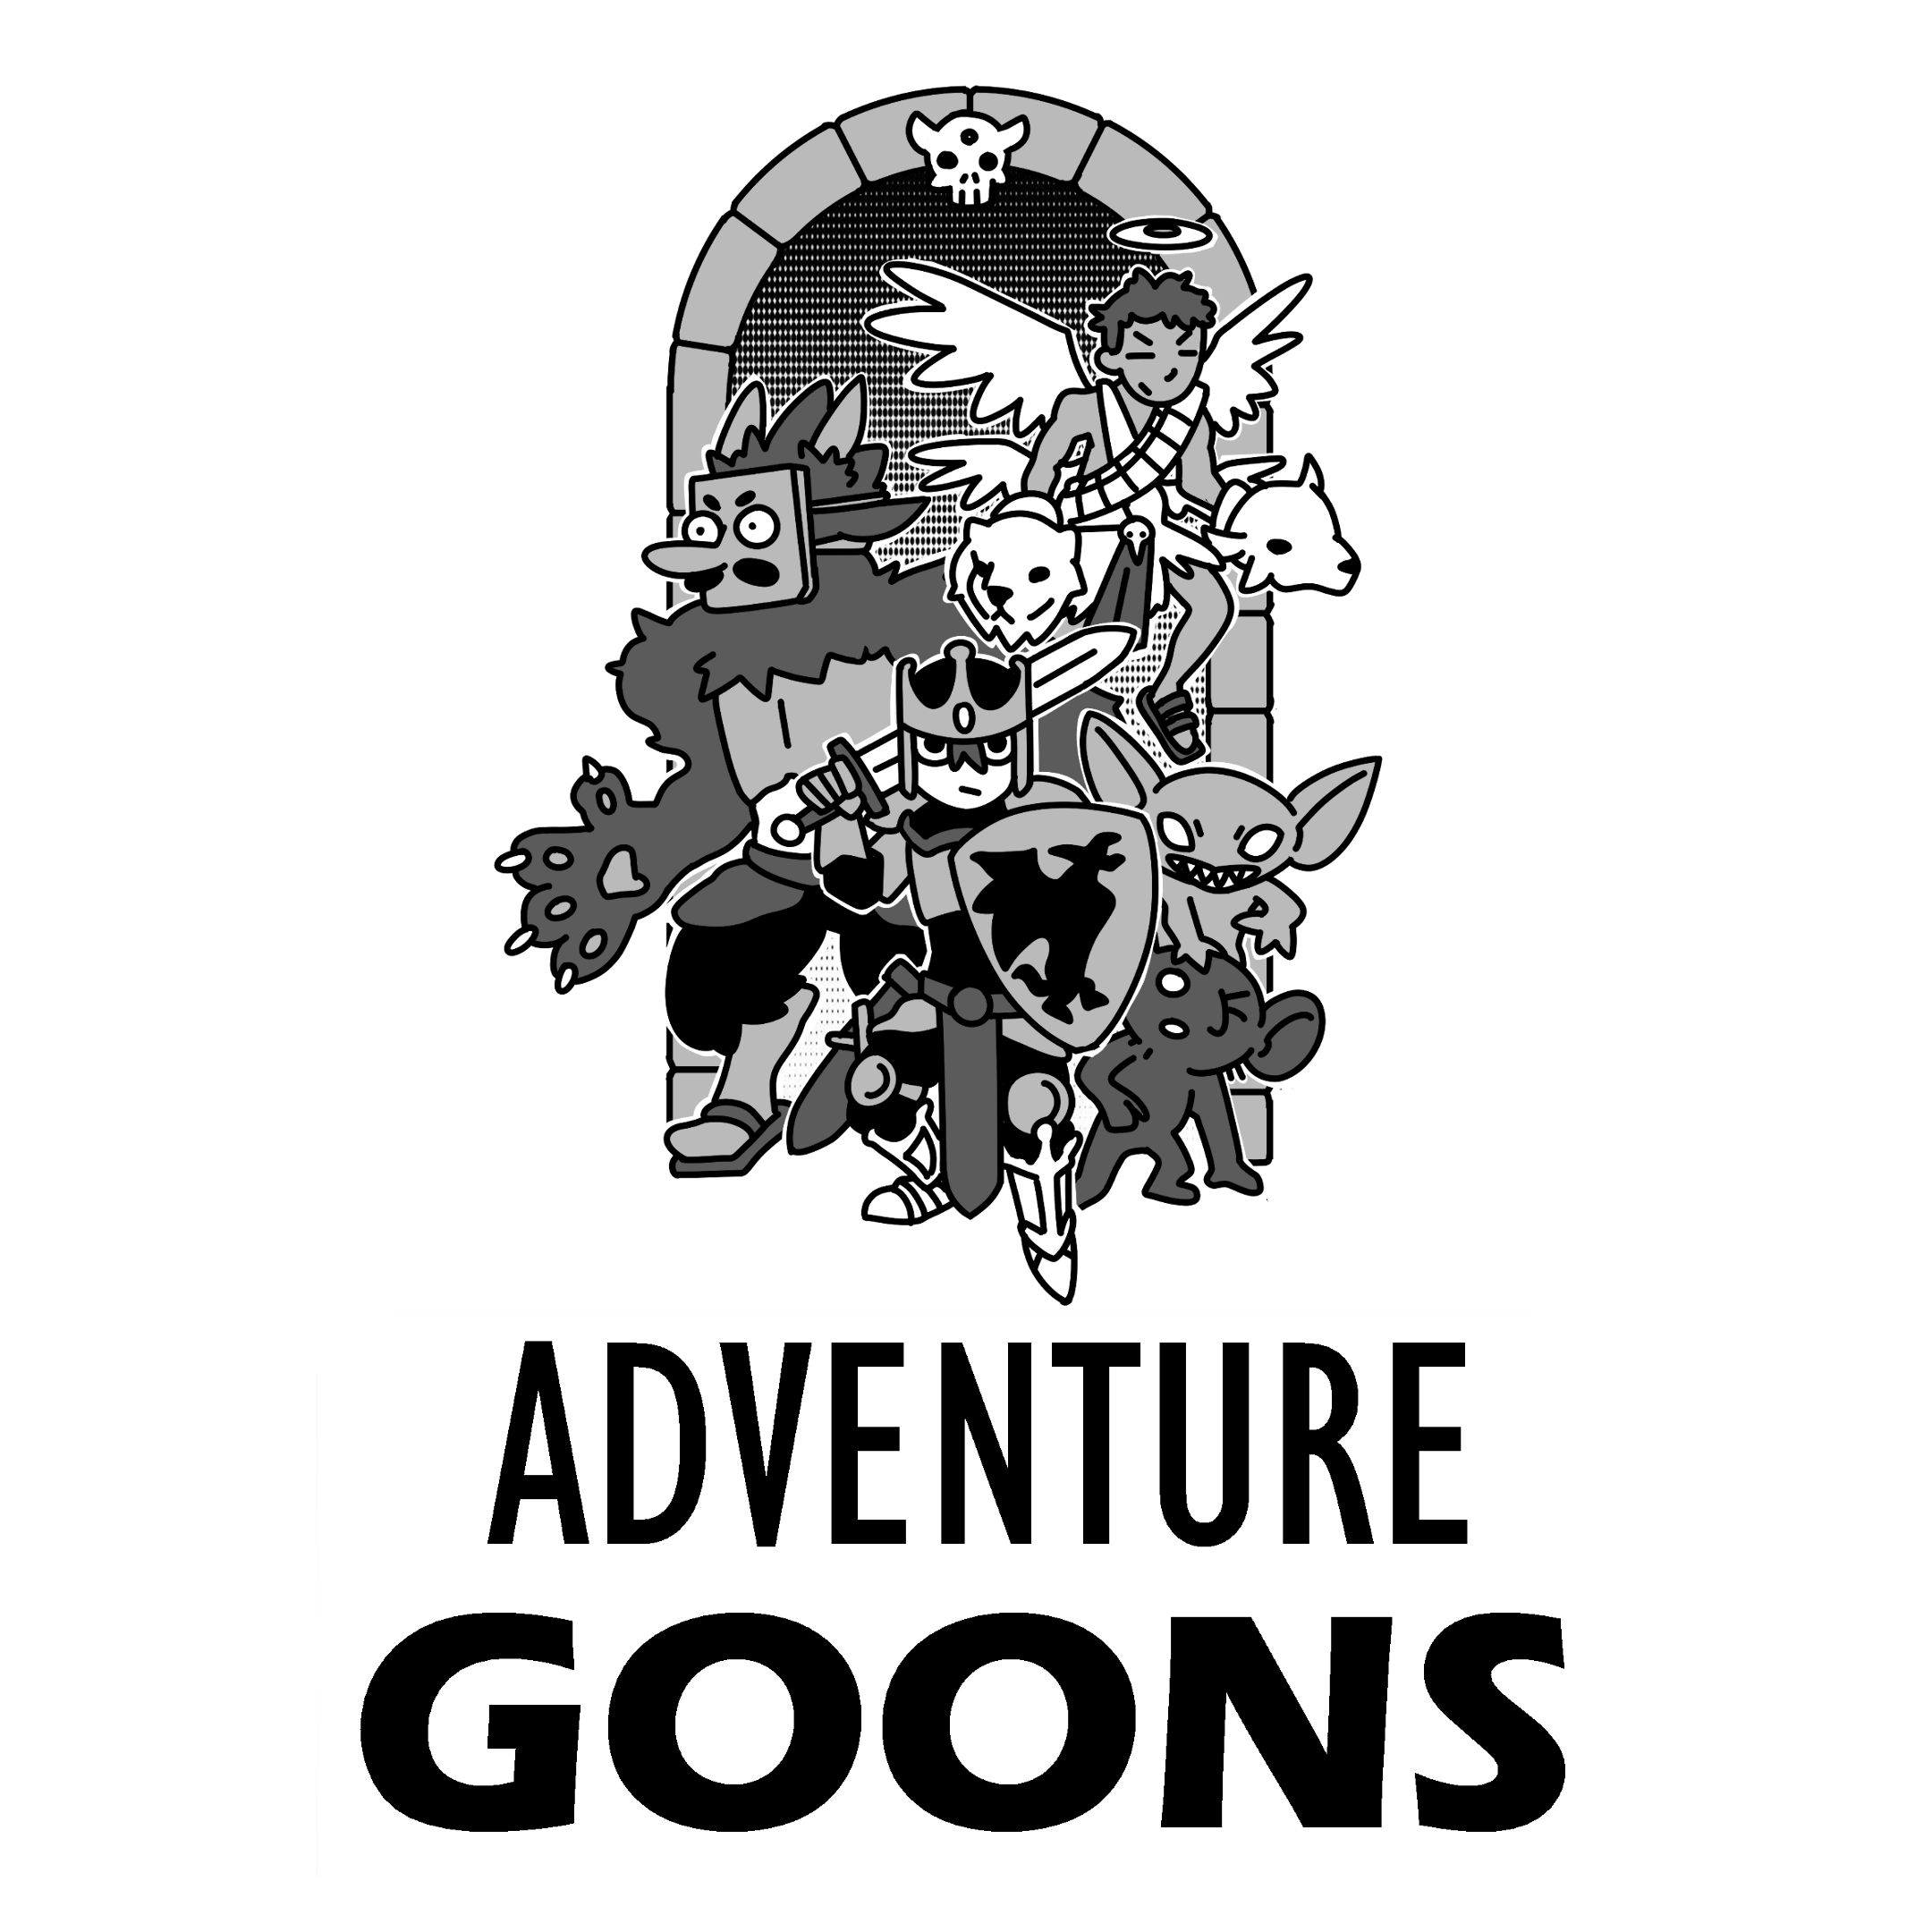 Adventure Goons by Tucozz